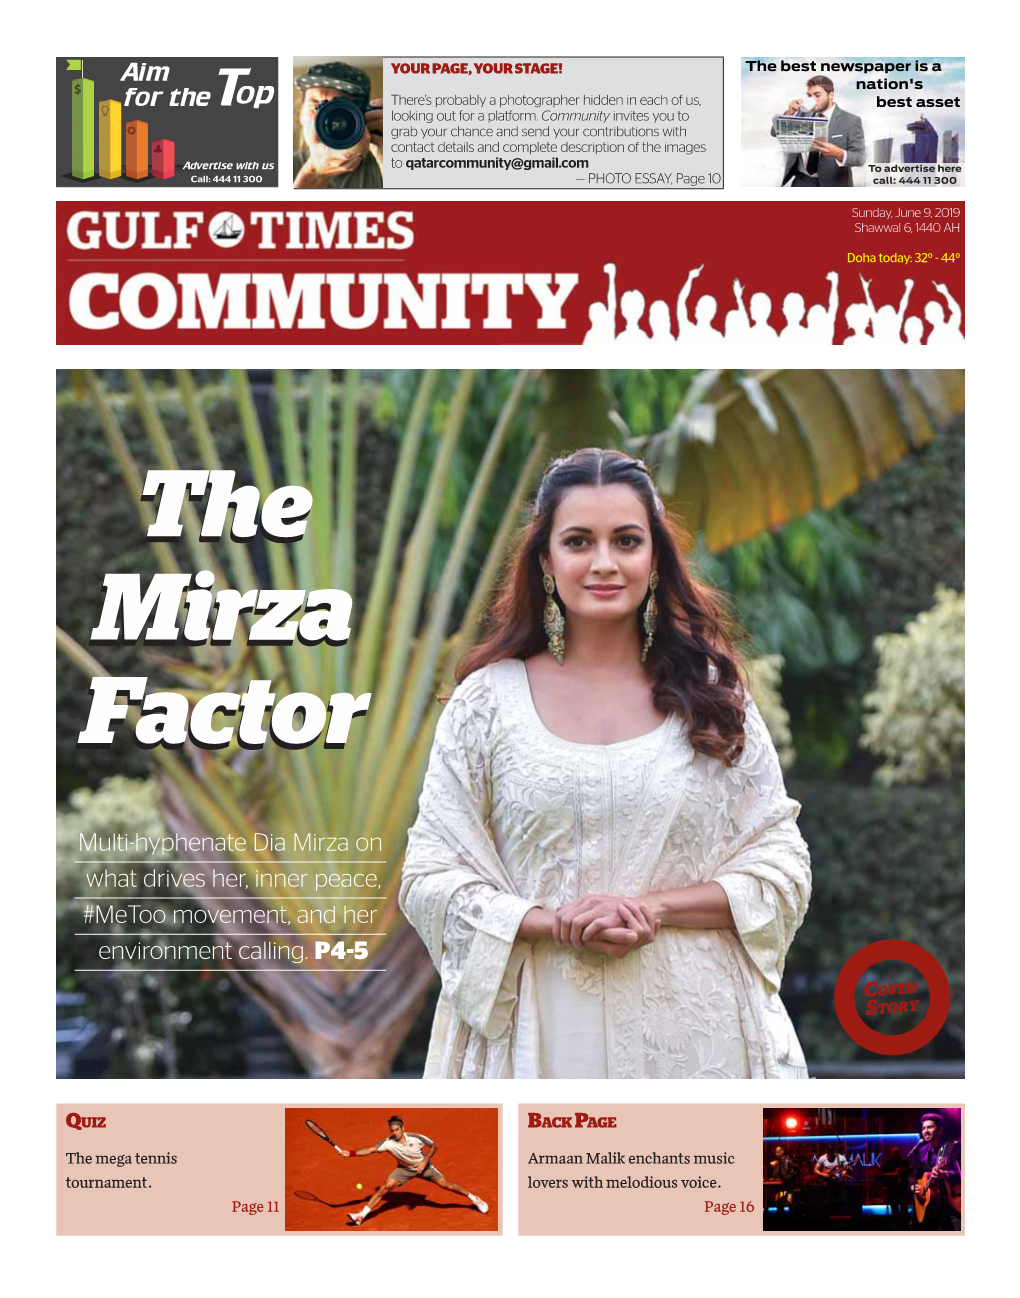 Multi-Hyphenate Dia Mirza on What Drives Her, Inner Peace, #Metoo Movement, and Her Environment Calling